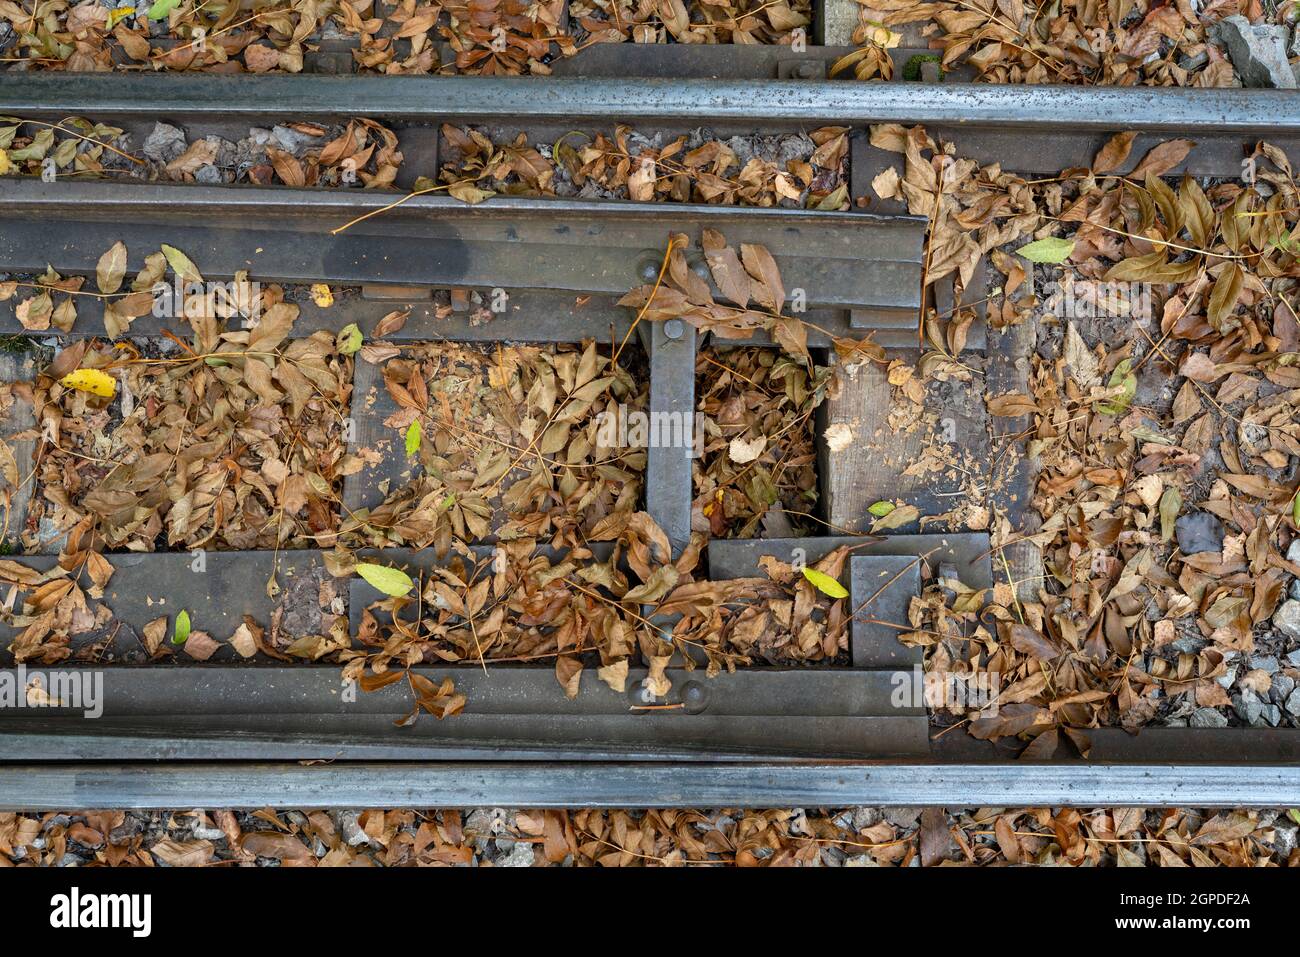 600mm gauge train track near a junction, with autumn leaves. A look from above. Open air limestone mining museum 'Barbora' in Czech Karst. Stock Photo